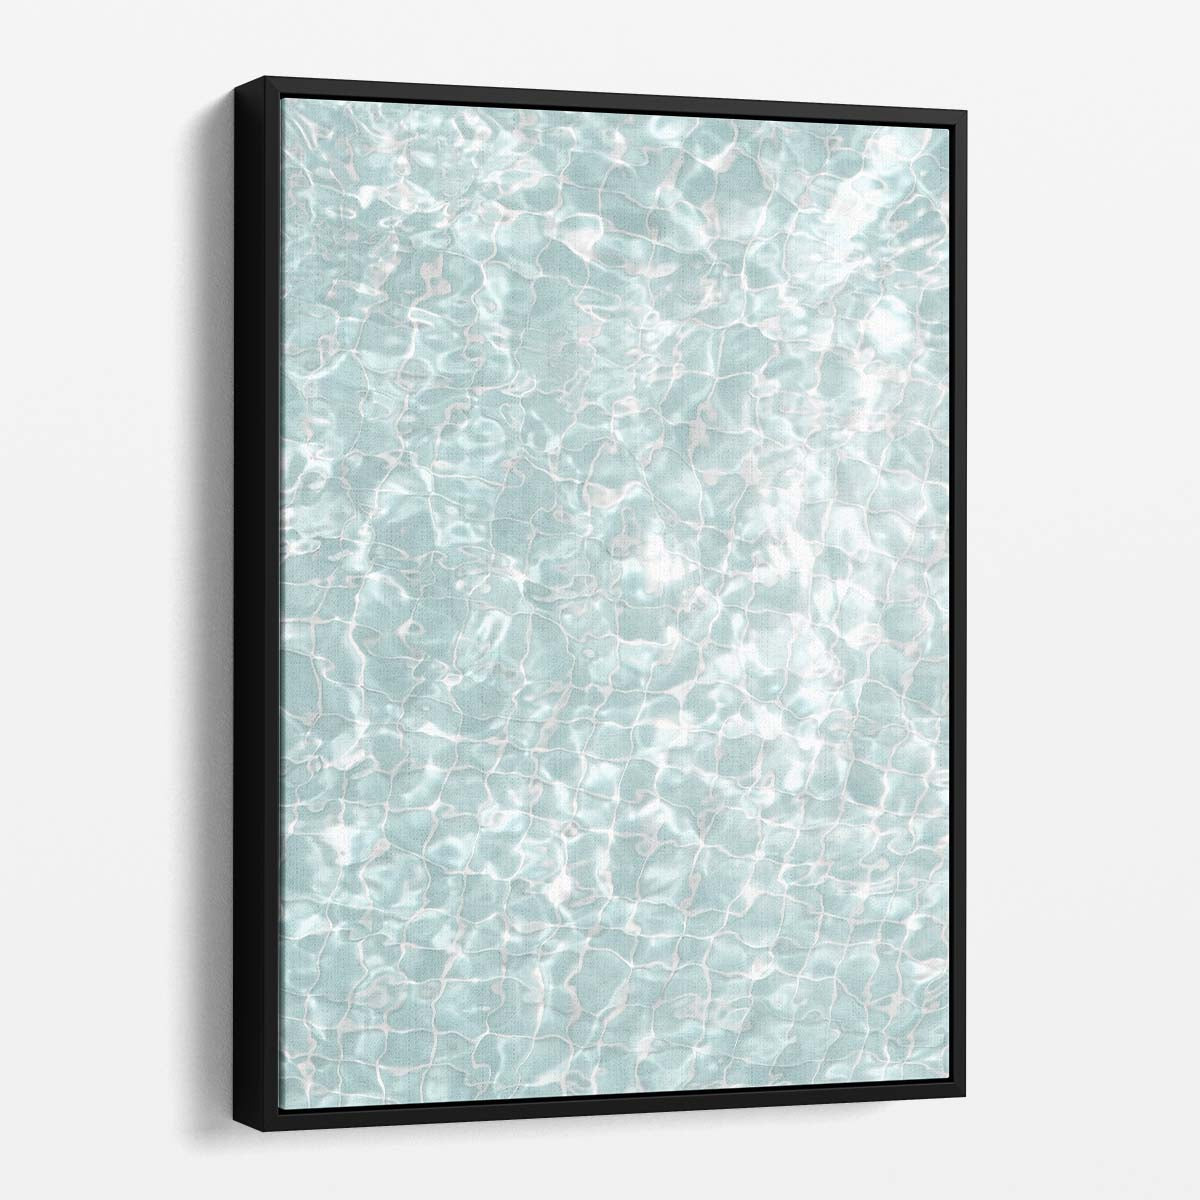 Abstract Swimming Pool Reflection Photography - Graphic Water Pattern Art by Luxuriance Designs, made in USA